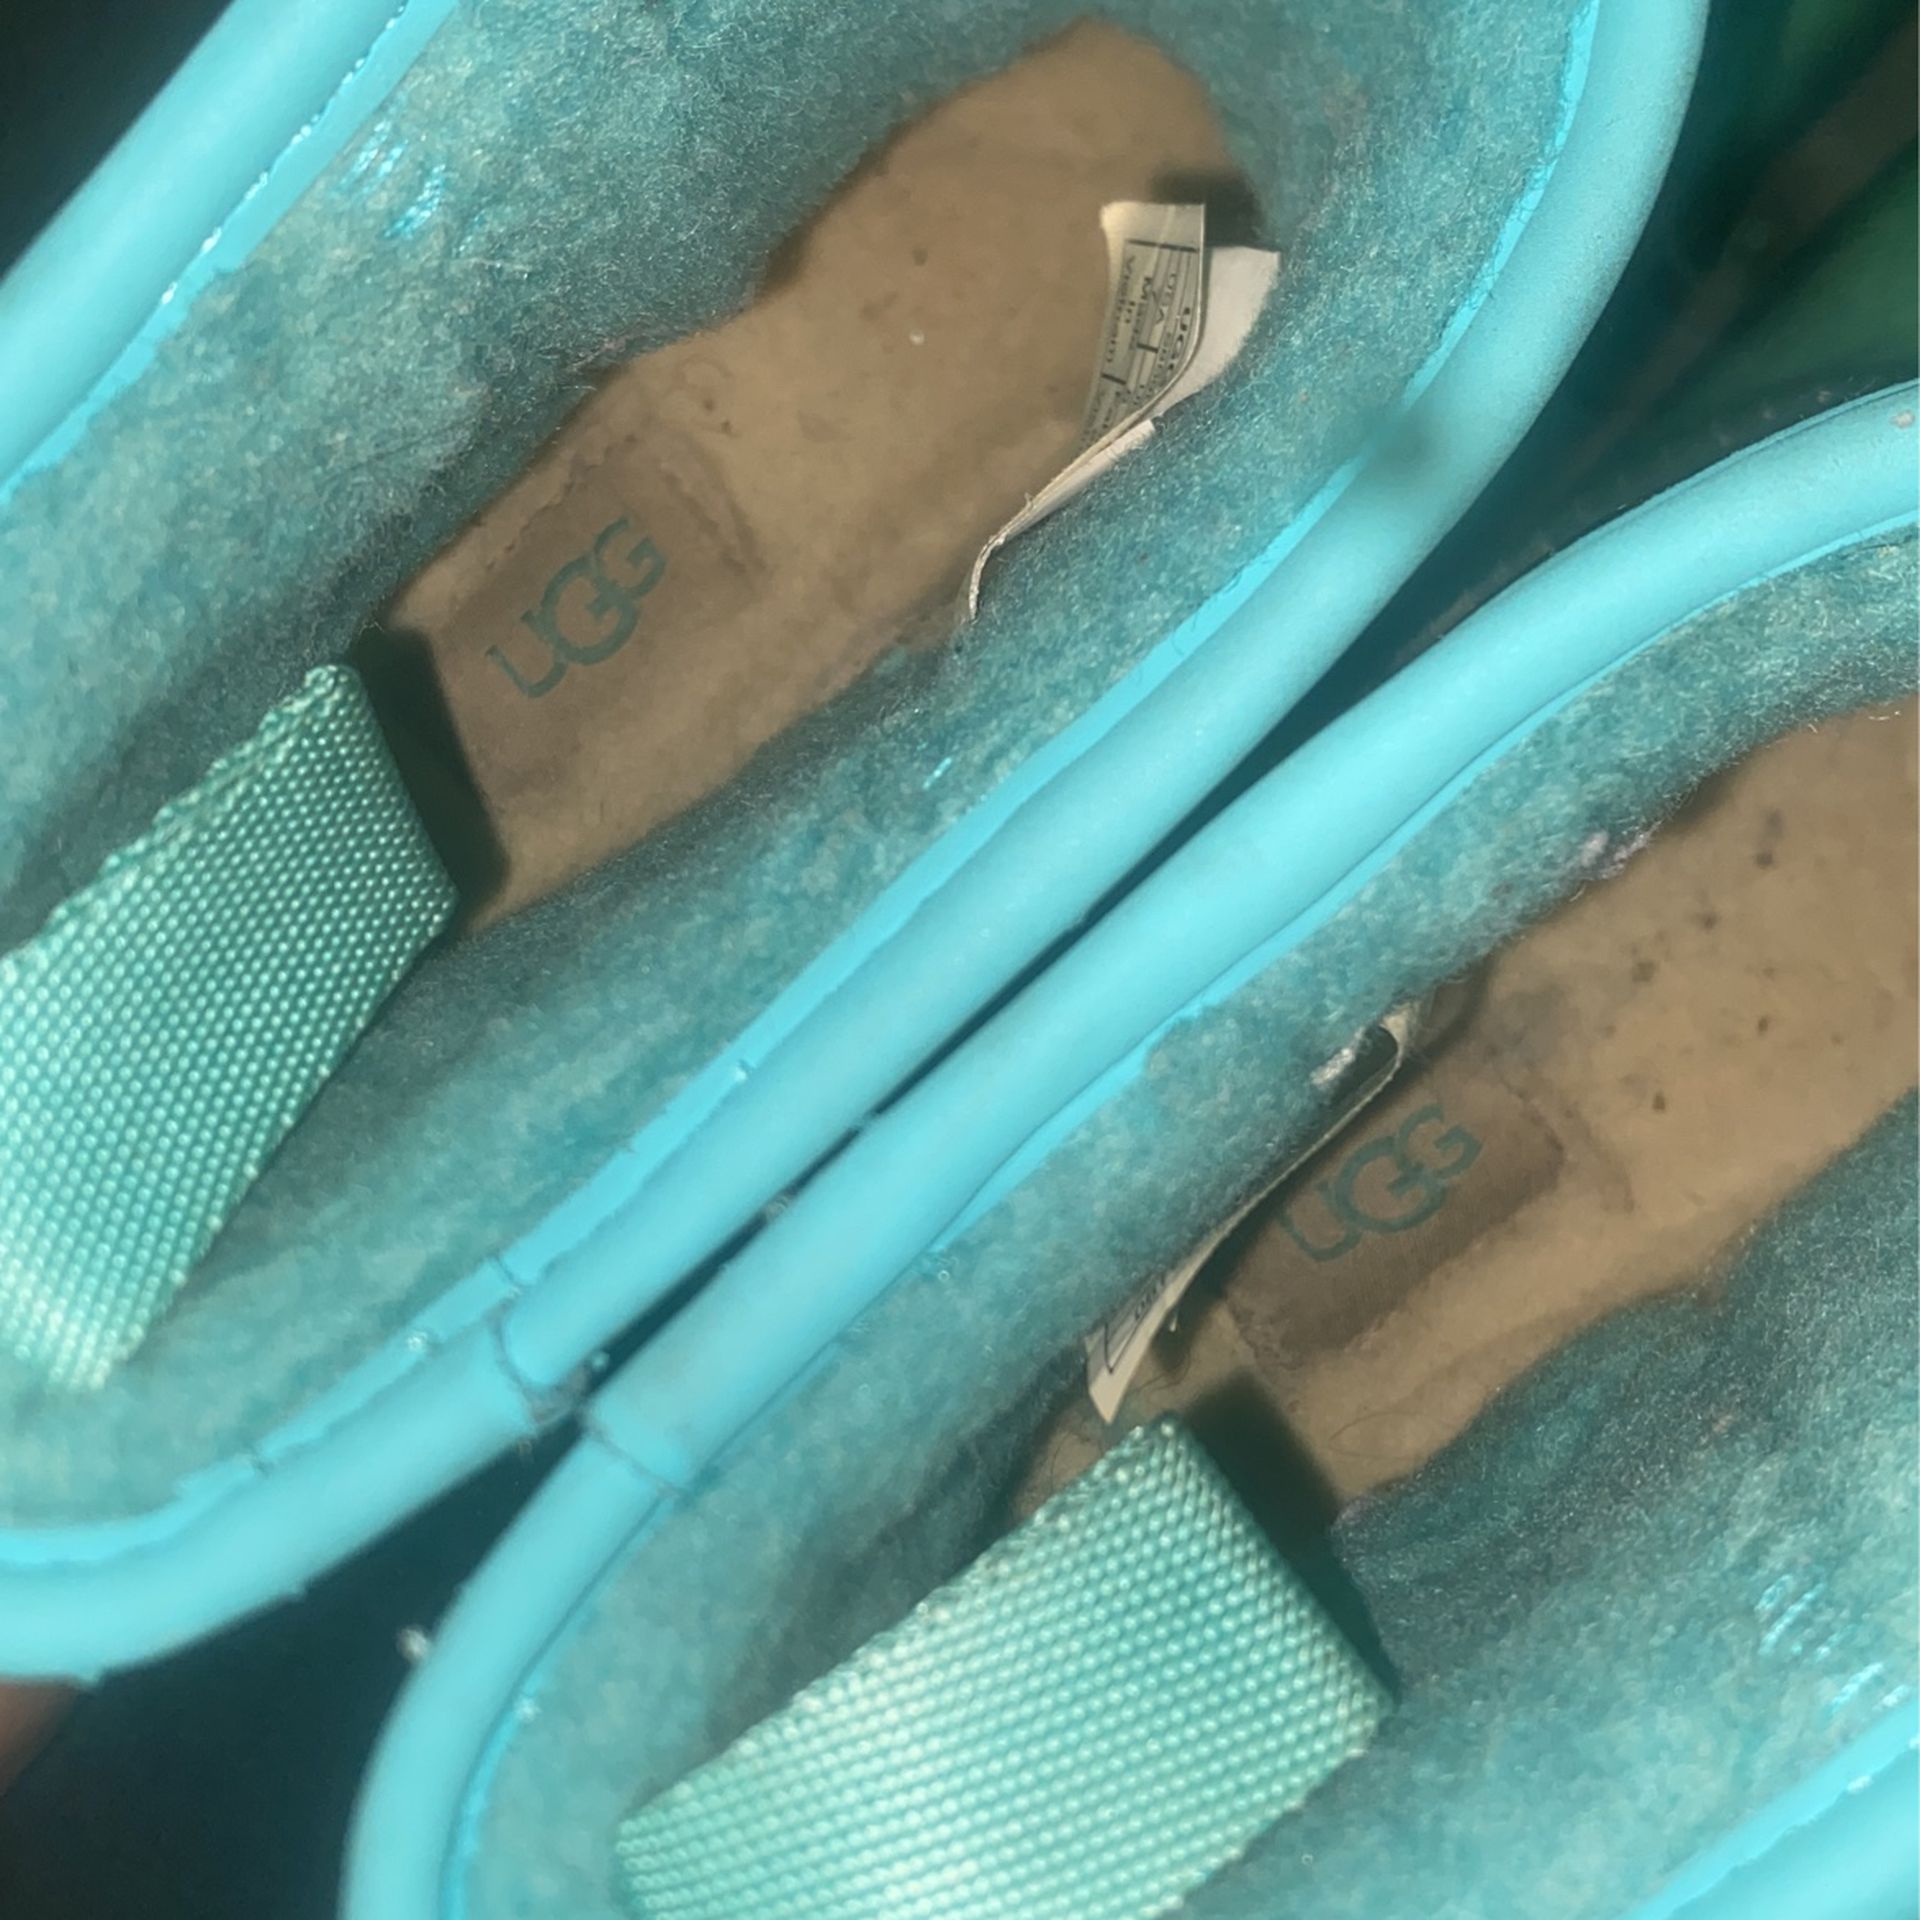 Turquoise Ugg Boots Size 7 In Women 